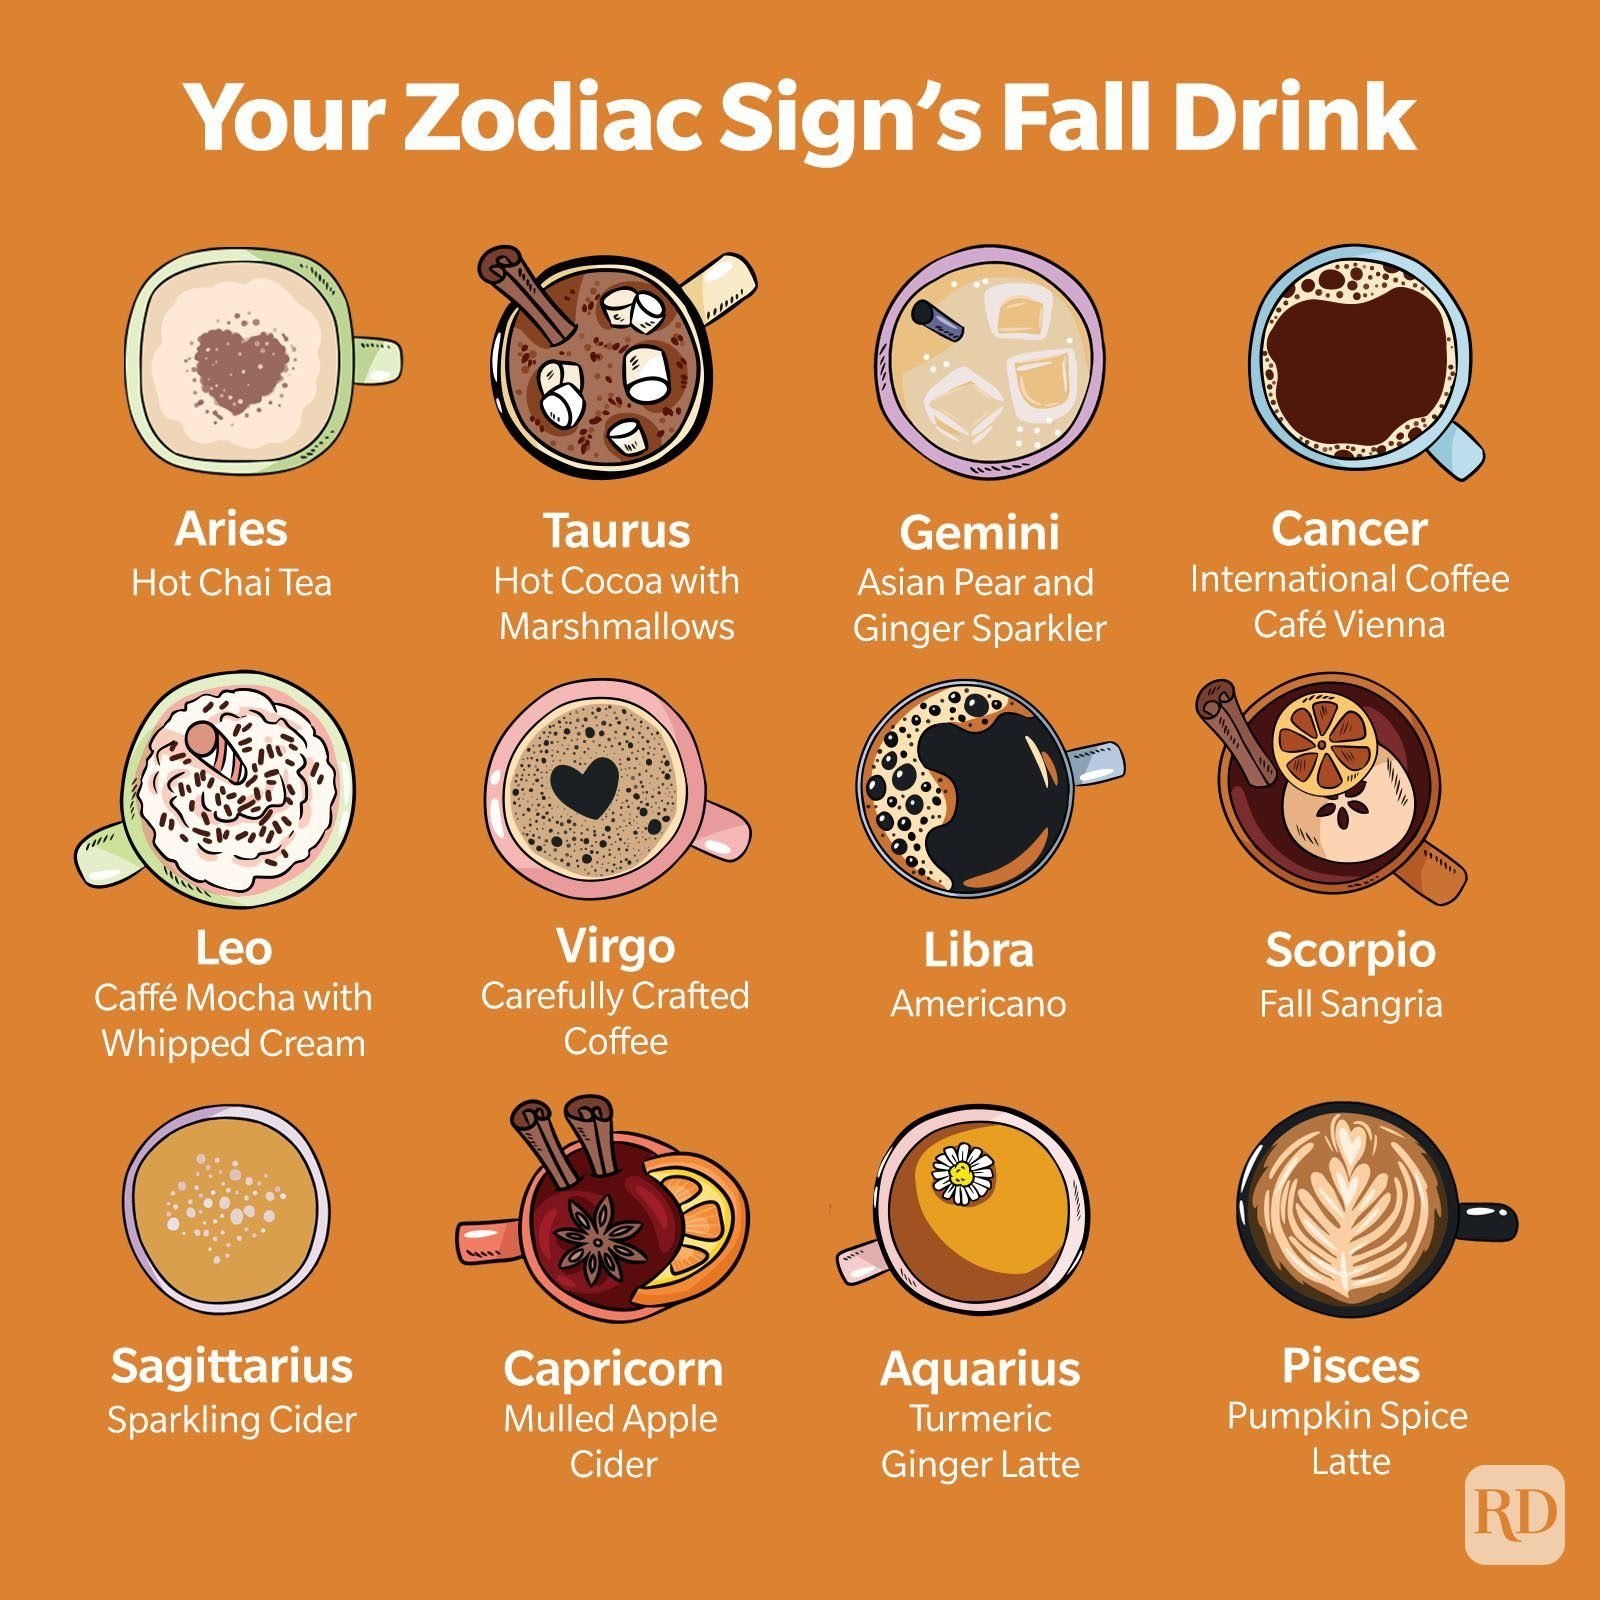 Your Zodiacs Fall Drink infographic